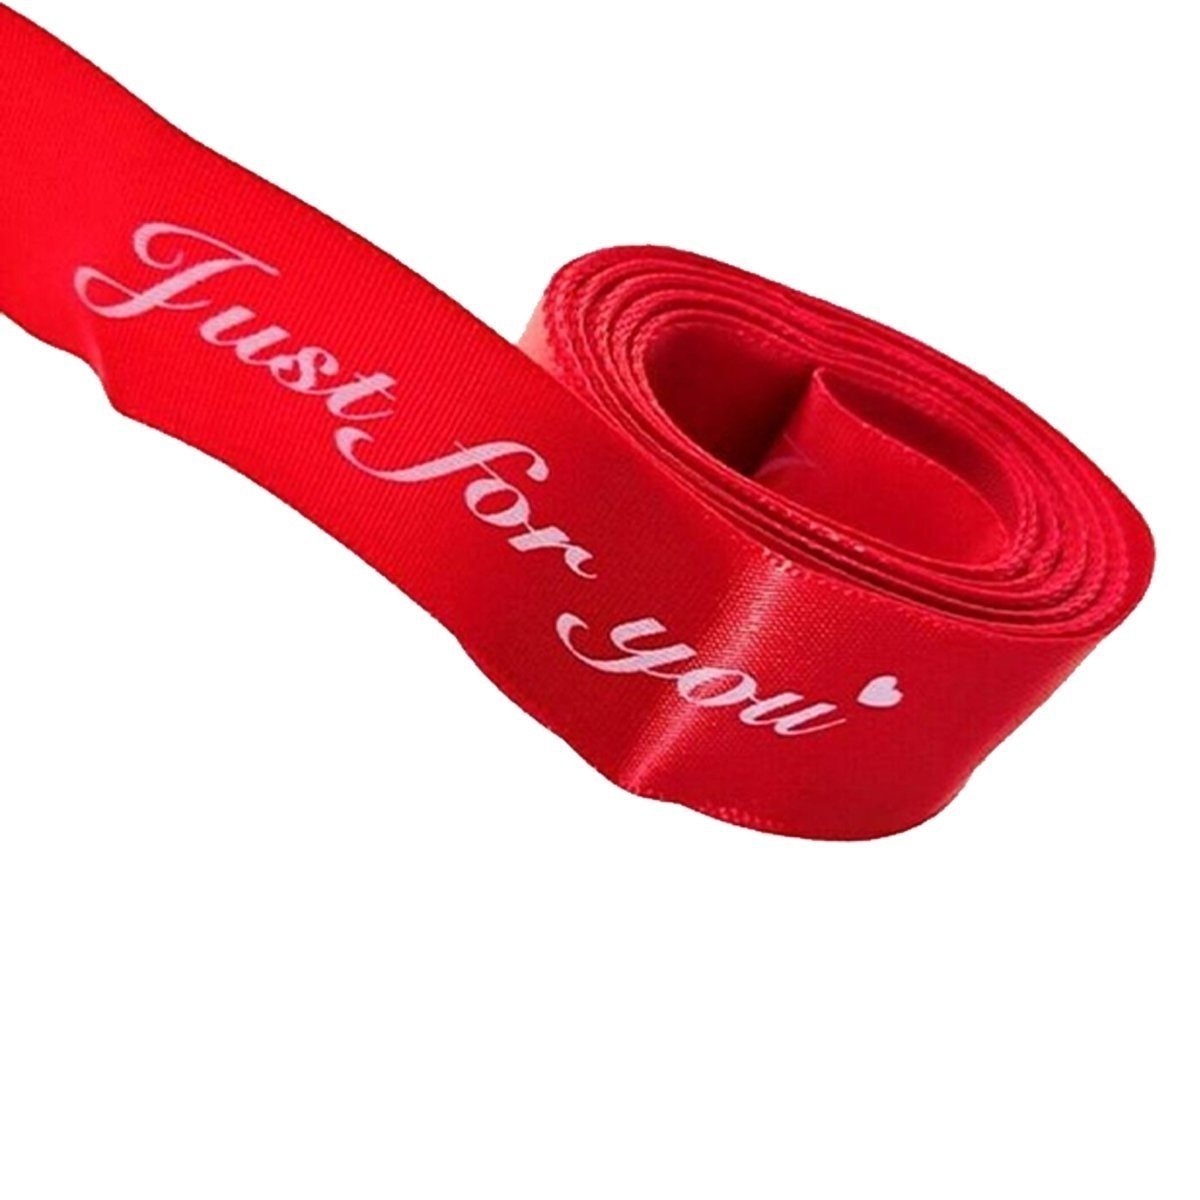 5m Printed Ribbon Set 25mm "Just For You" Wedding Christmas Birthday Present Bow Tie Wrap - Red - - Asia Sell